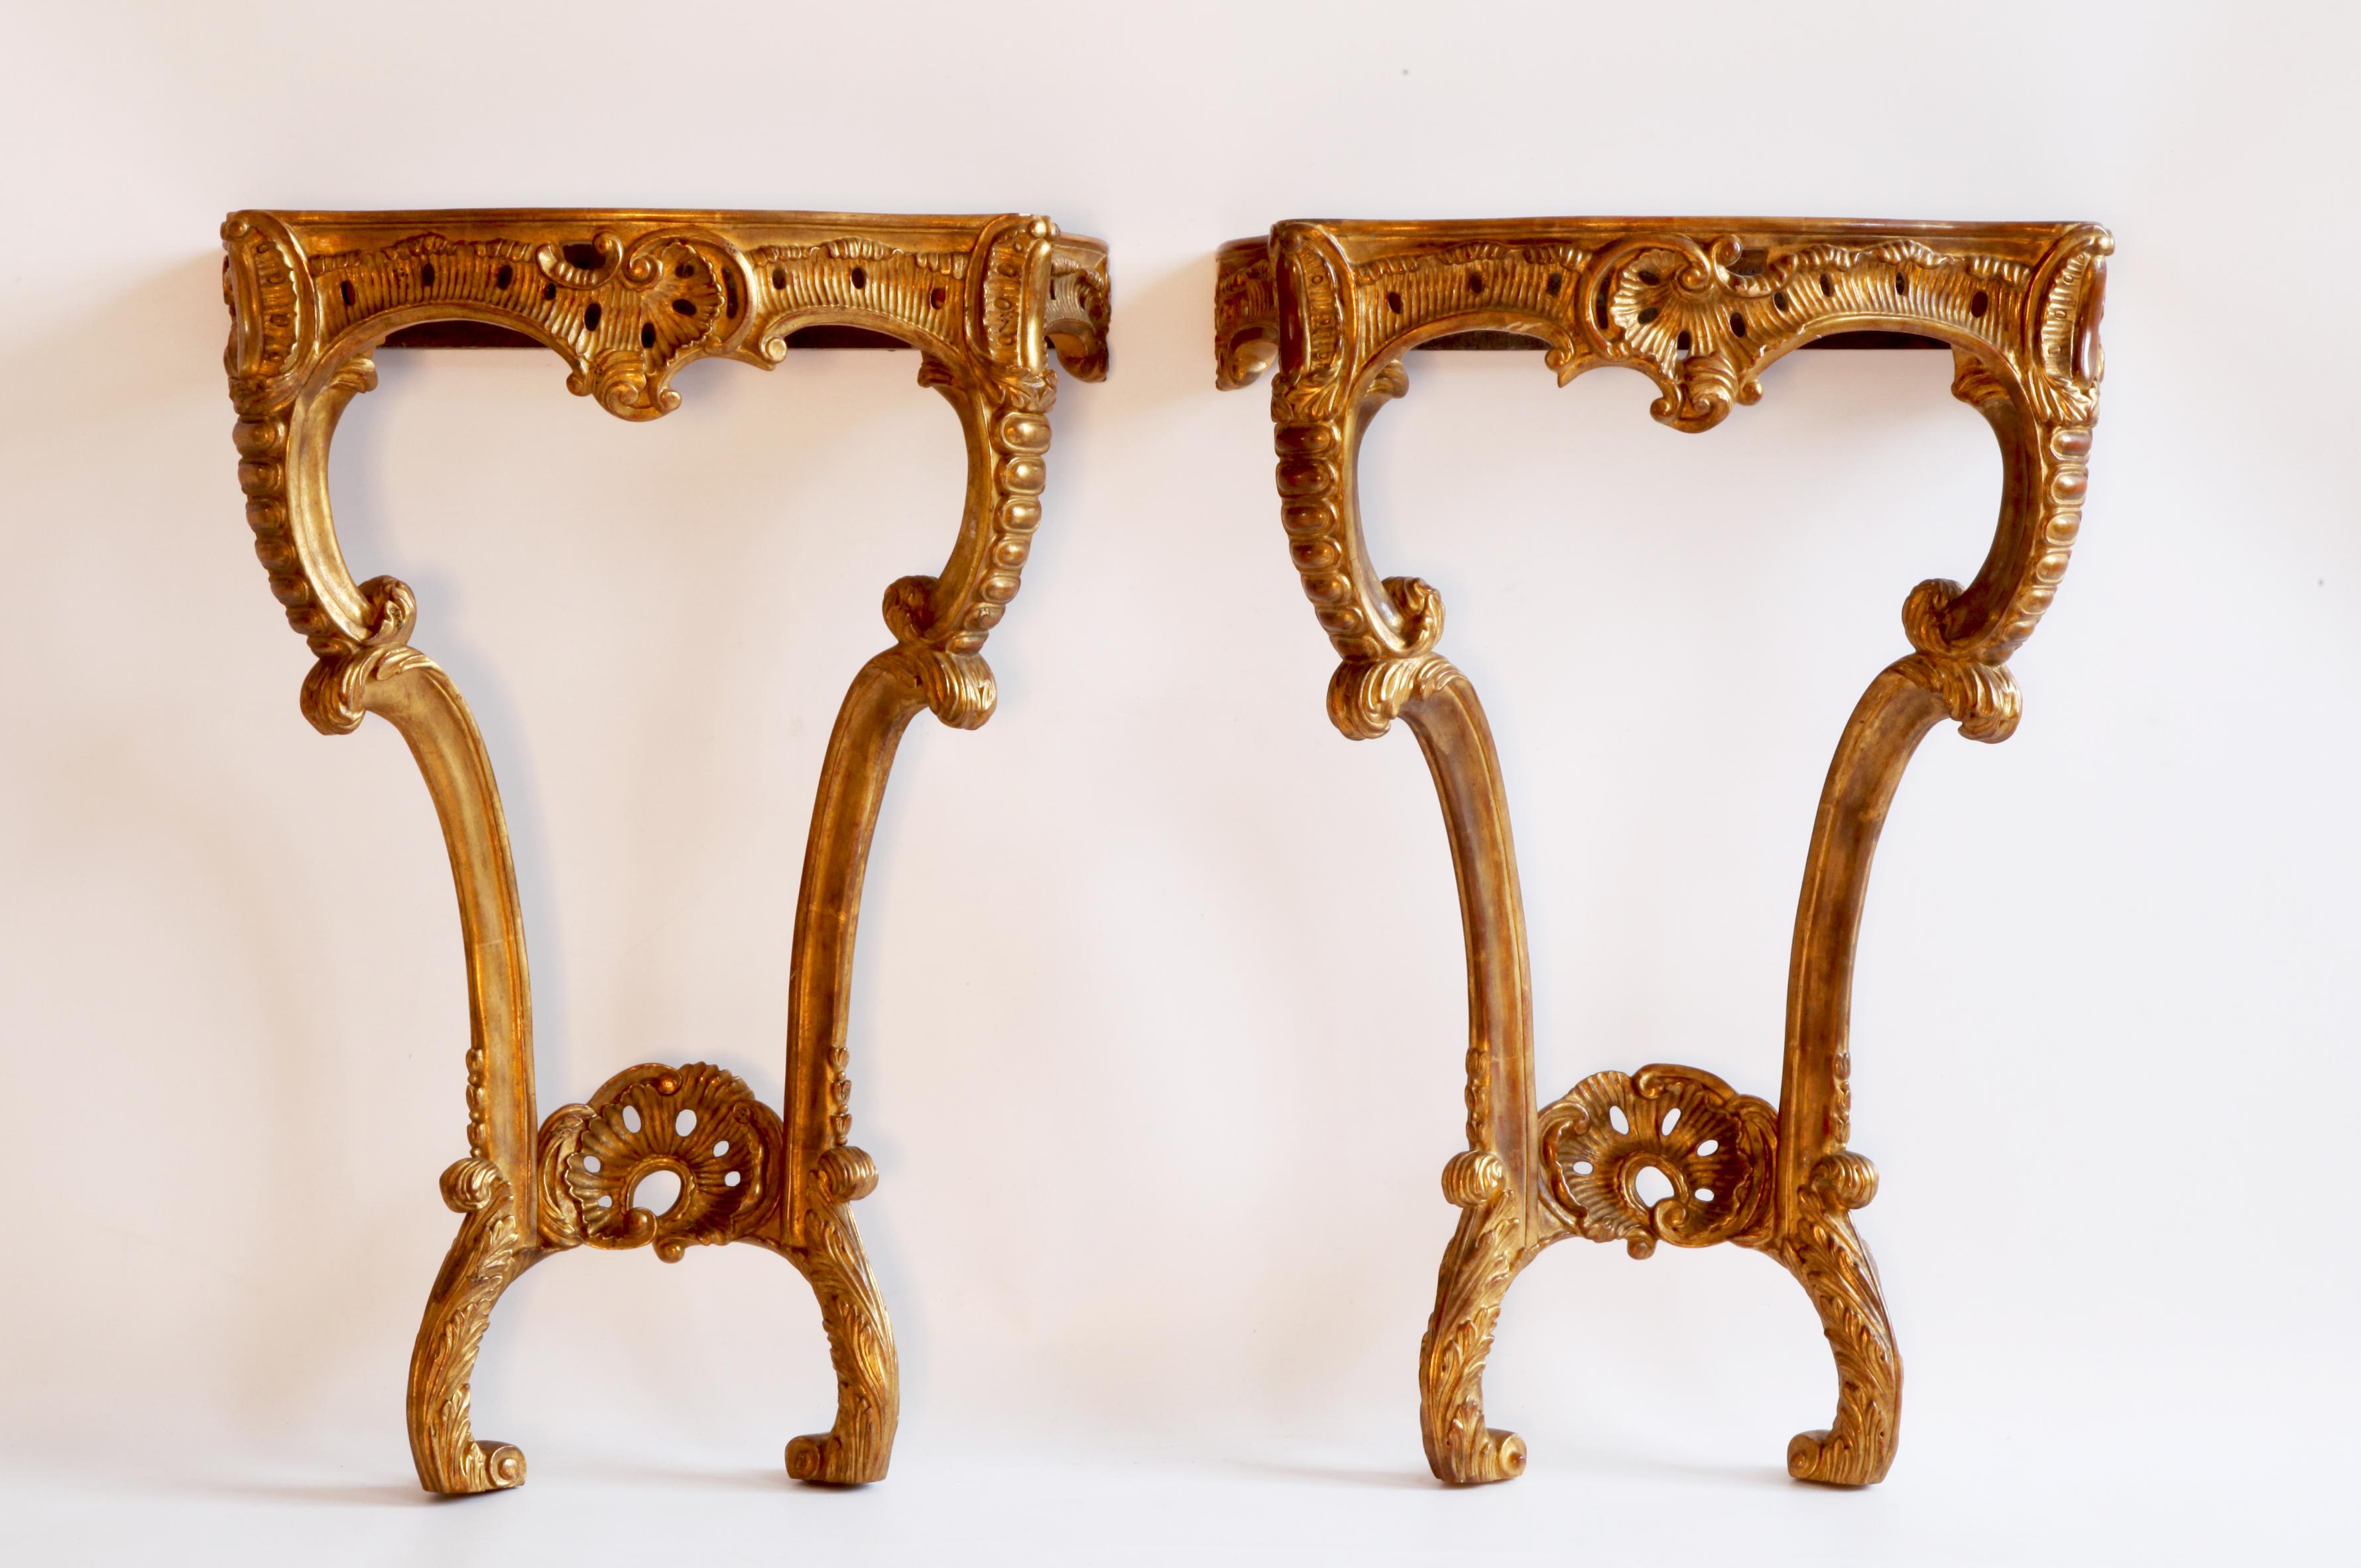 Pair of Rococo style consoles: elegantly sculpted by master craftsmen and finished with an antique gilded patina using traditional methods and materials. 

We have a selection of marble to choose from. (prices on request).